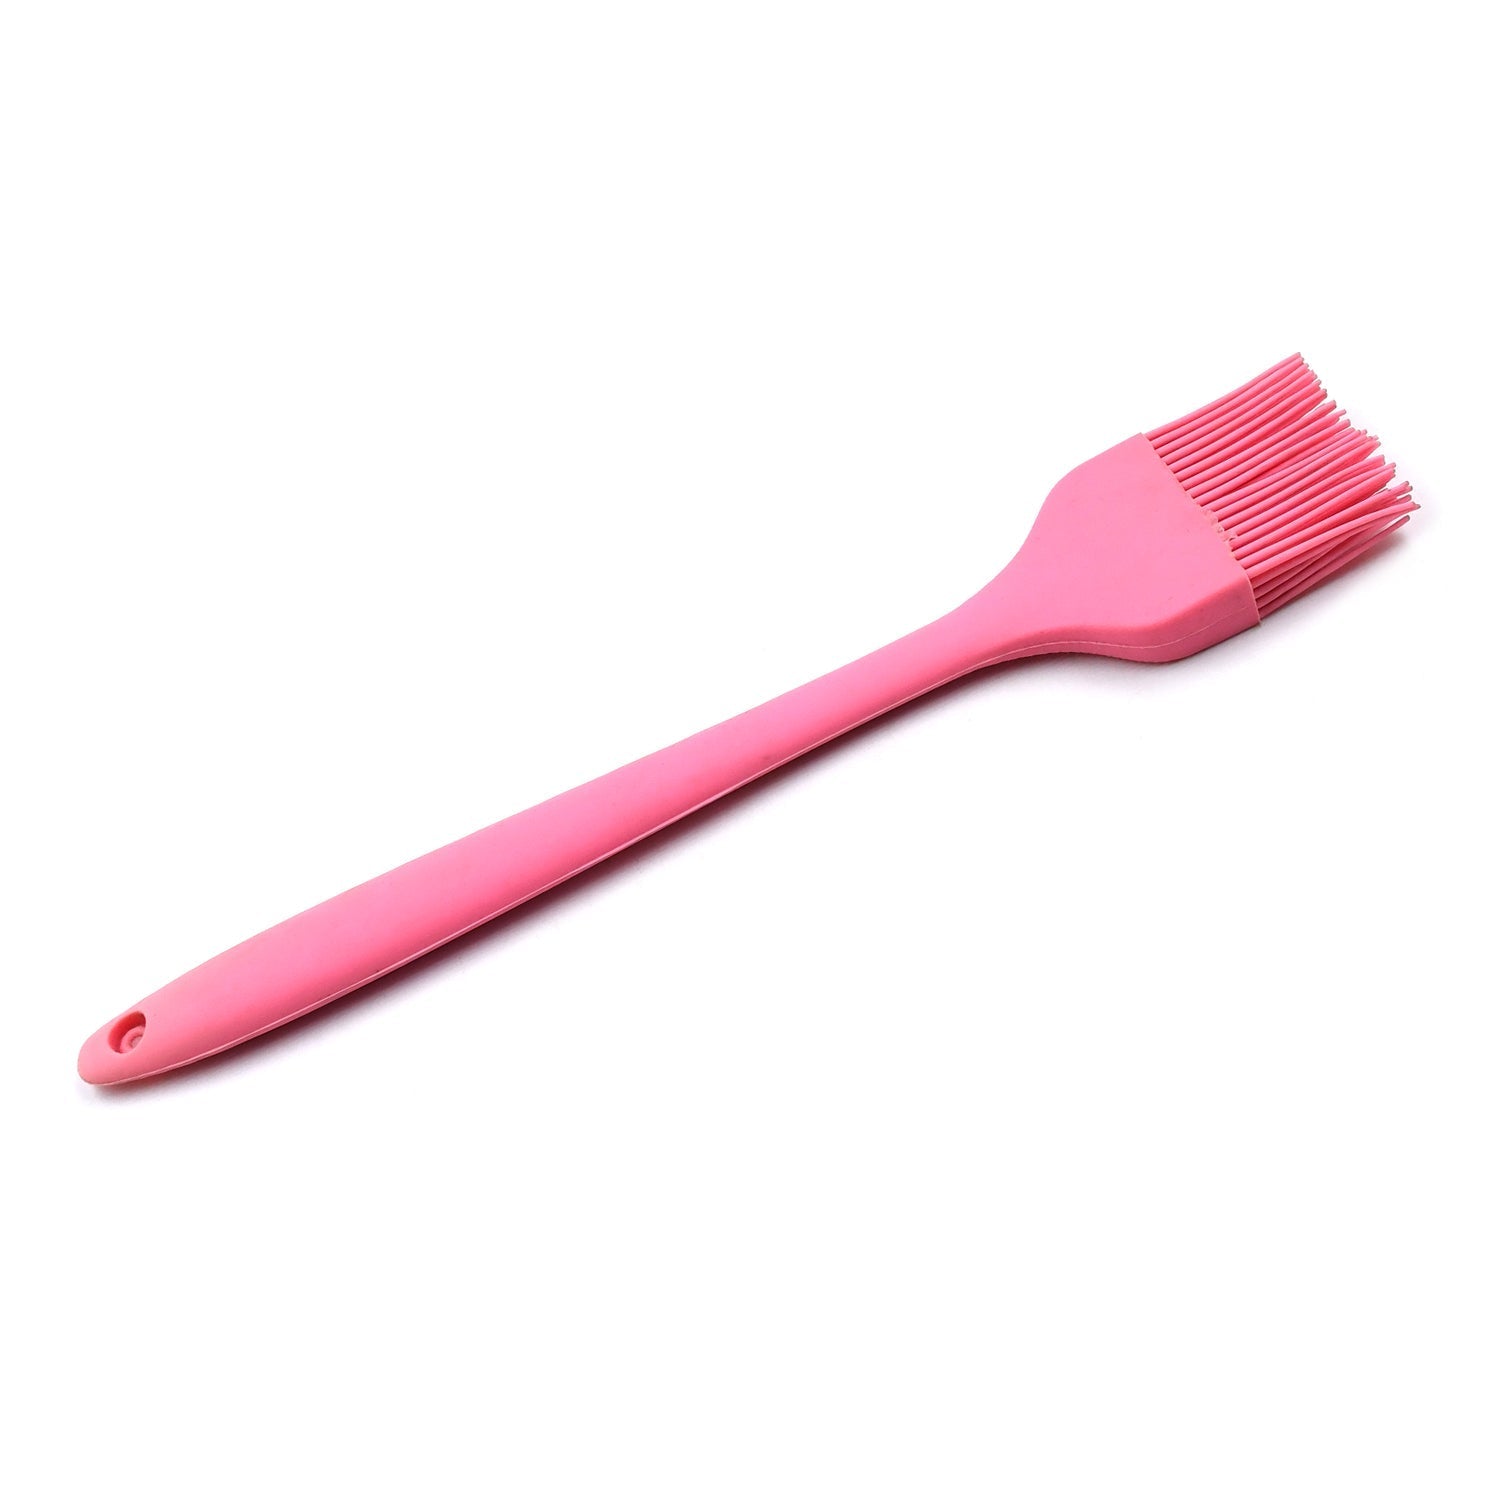 5446 Silicone Basting Brush - Heat Resistant Pastry Baking Bread Cake Oil Butter Brushes for BBQ Grill Kitchen Brush (26cm)